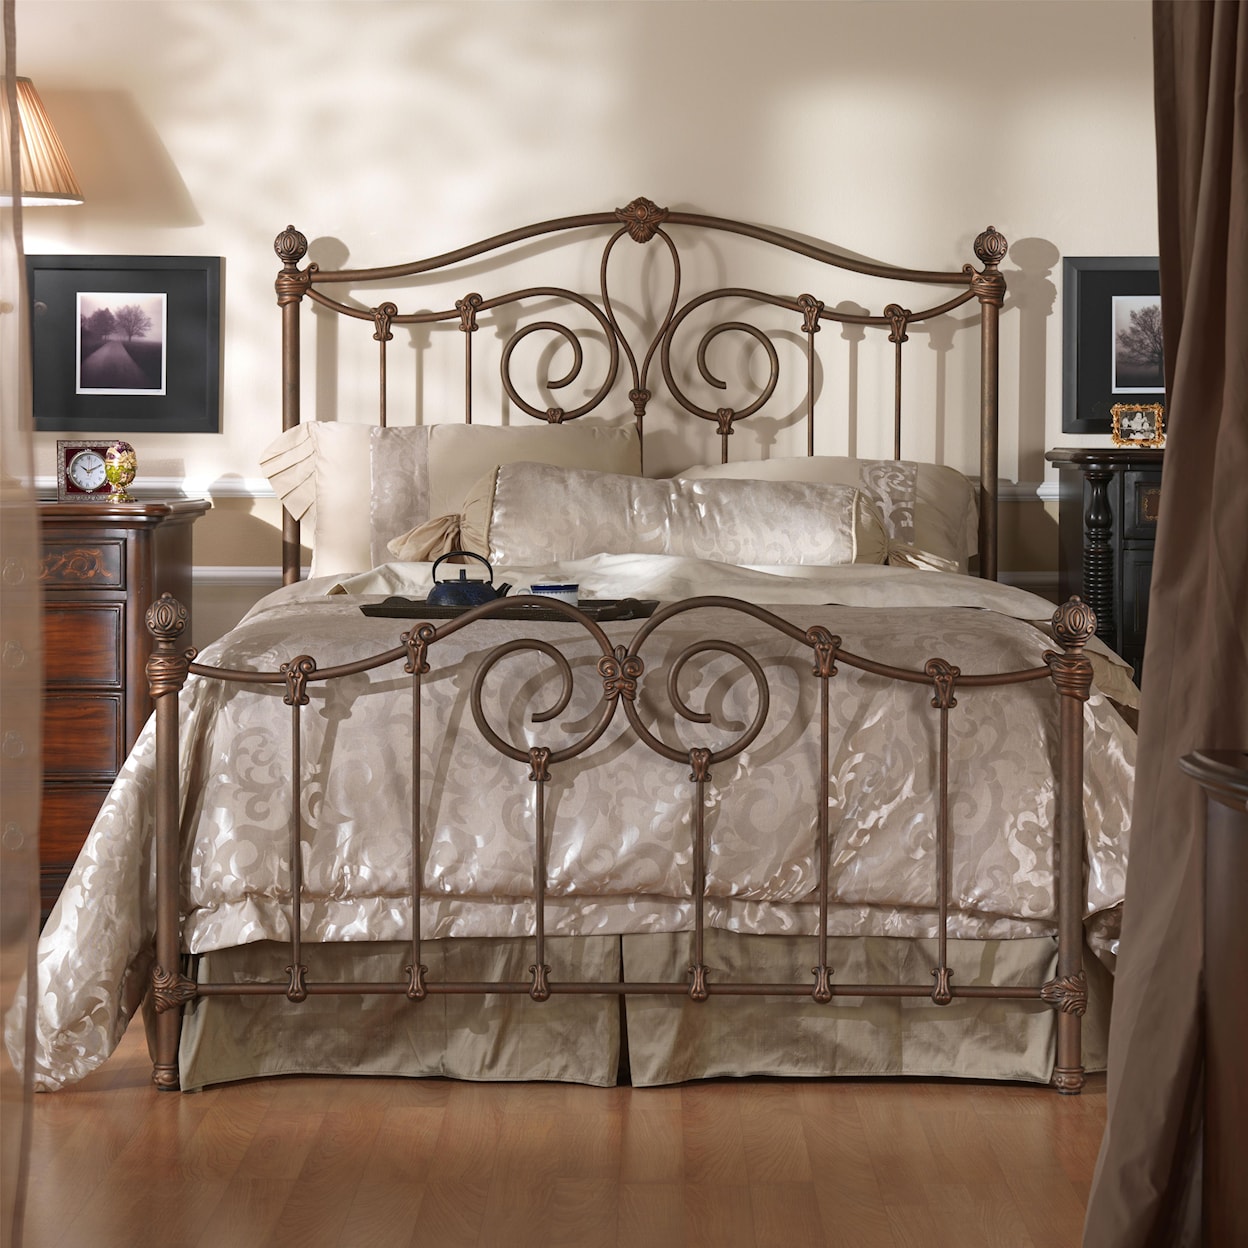 Wesley Allen Iron Beds King Olympia Bed